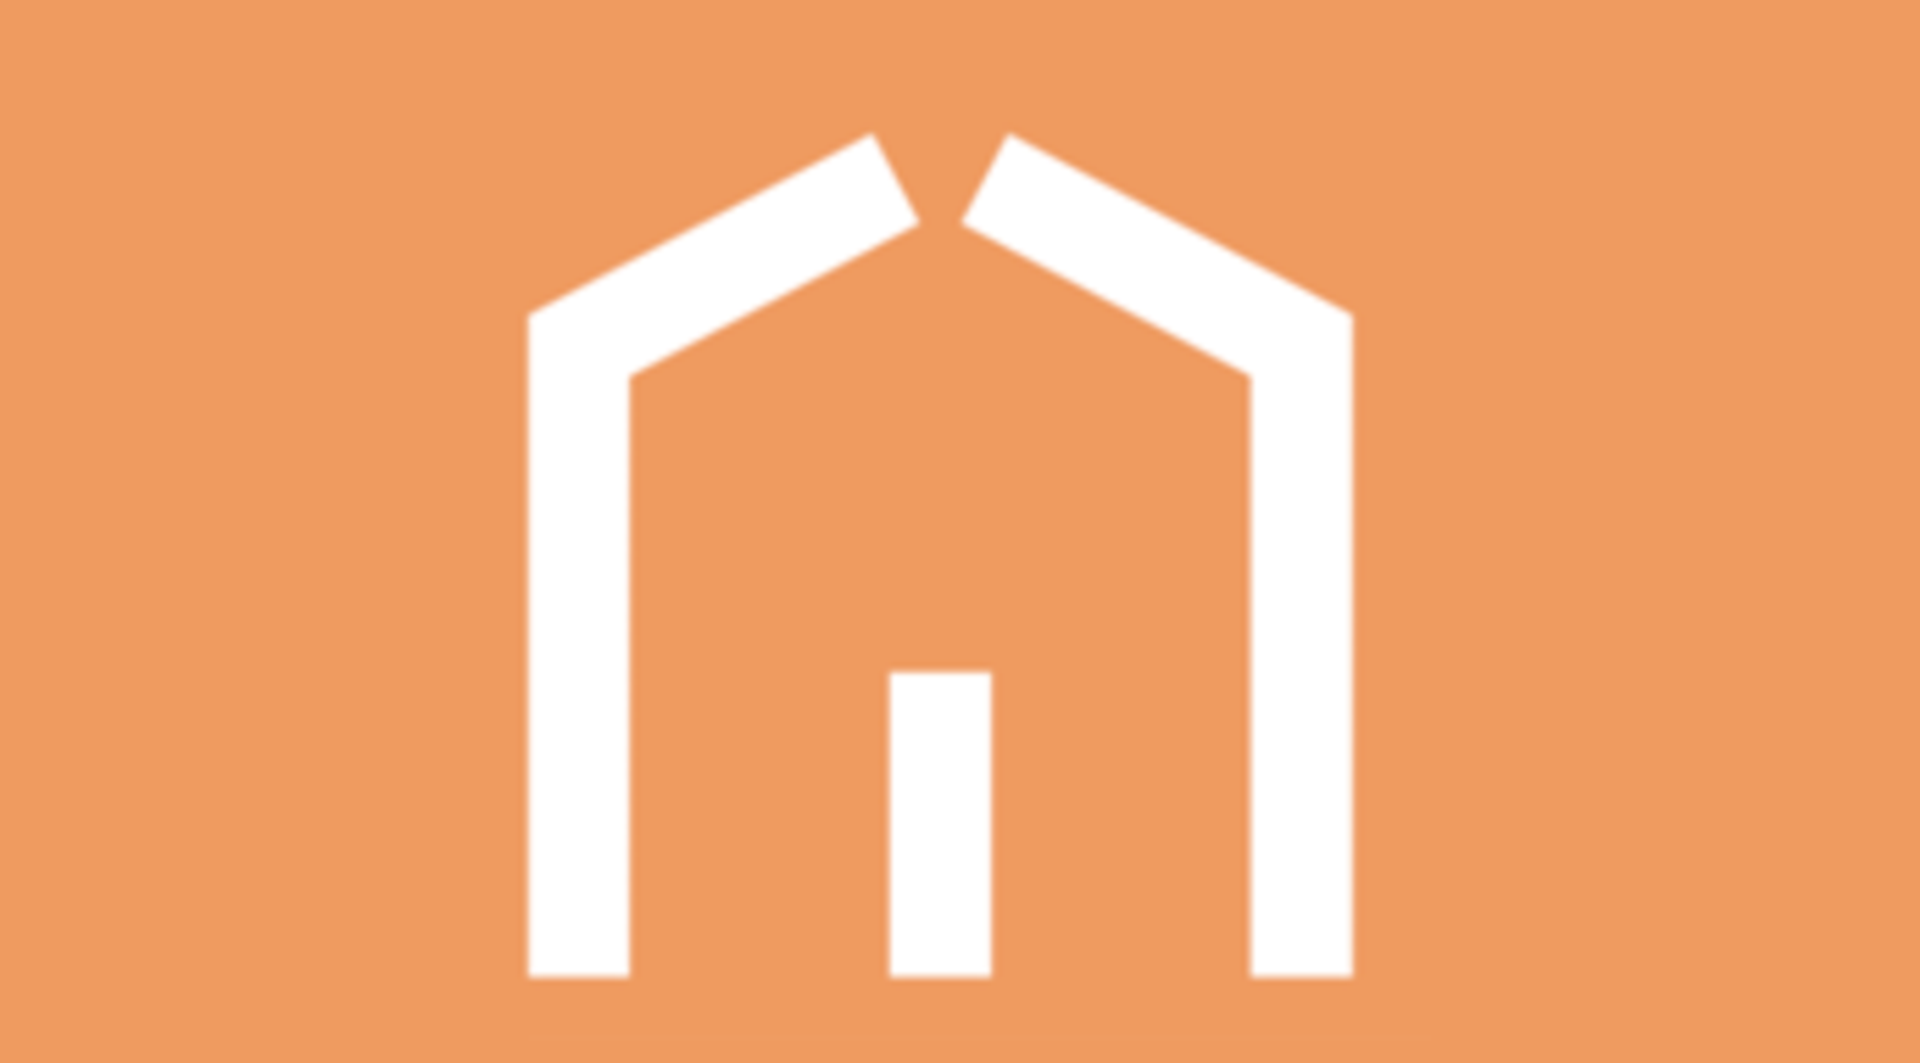 Right at home house logo on orange background